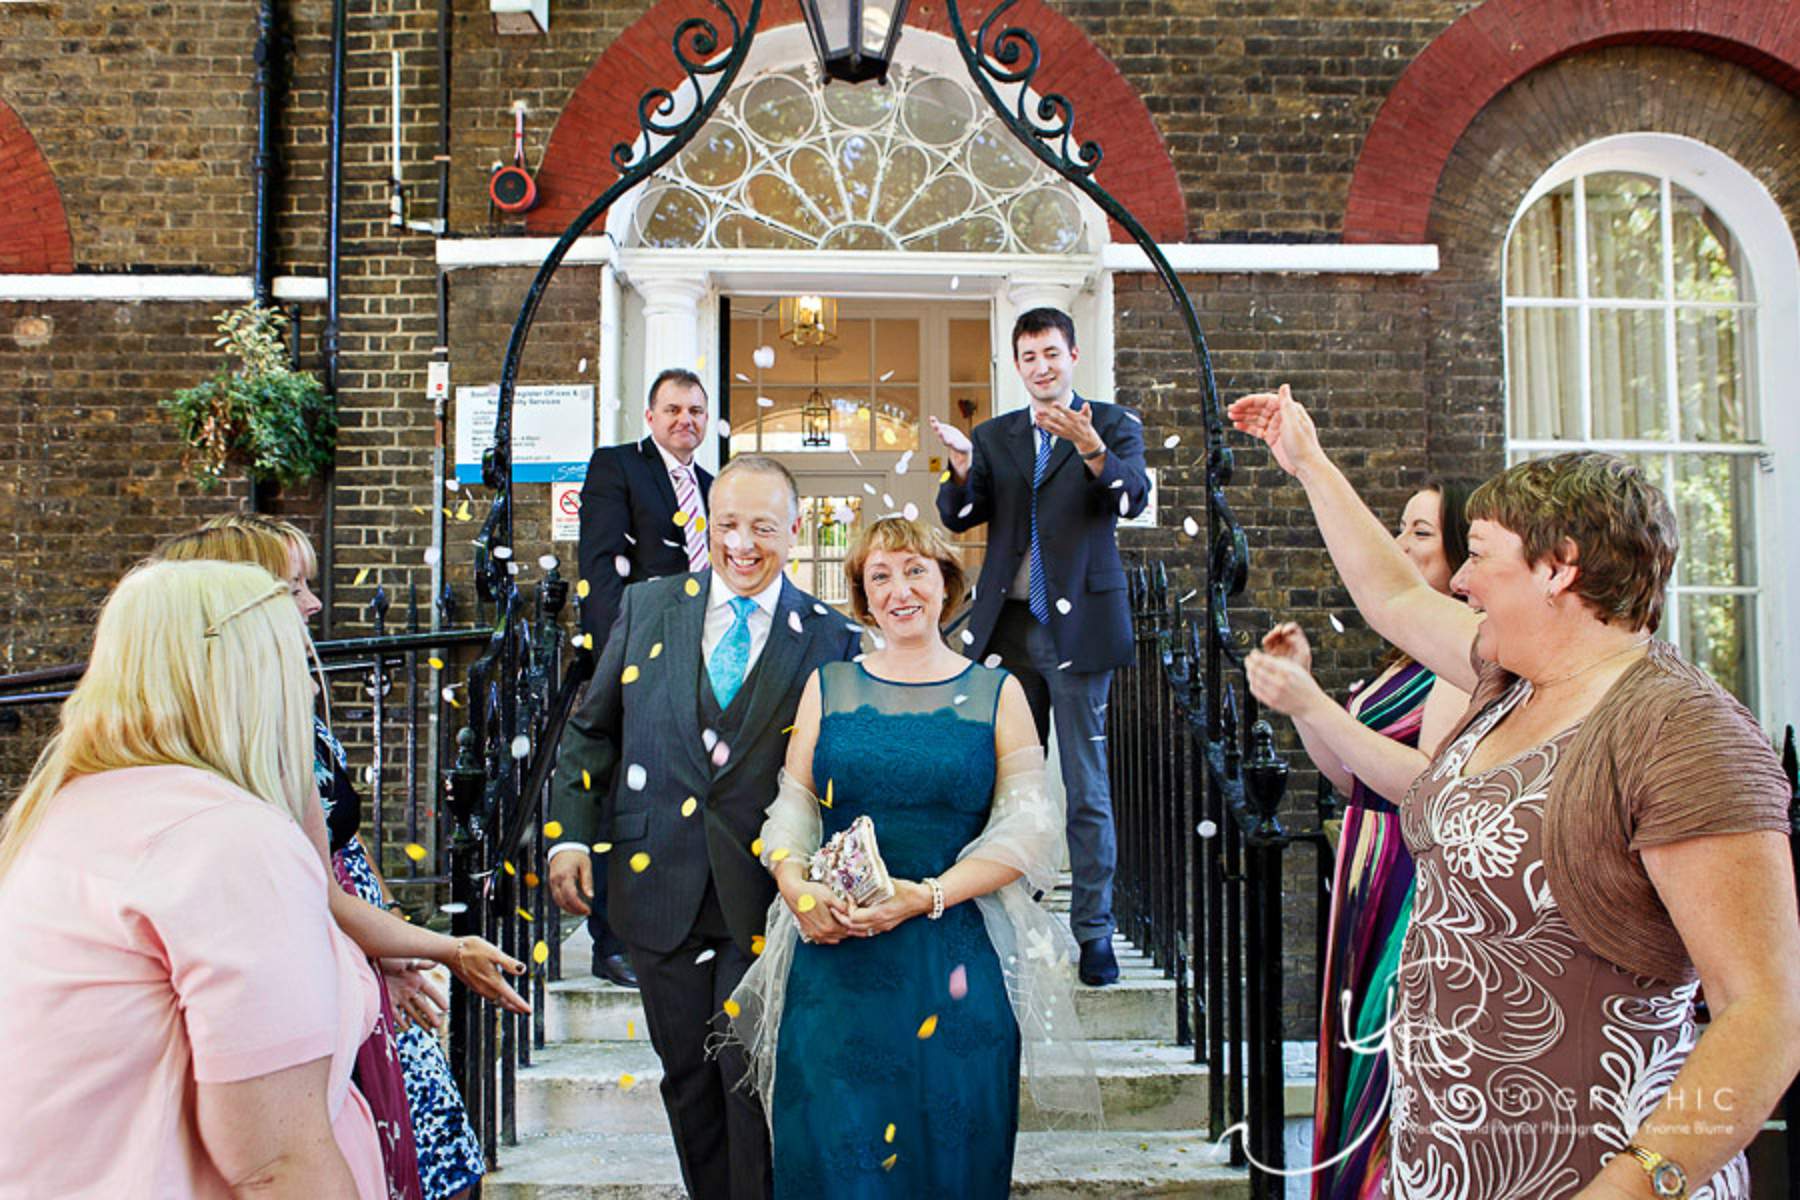 The bride and groom exit into a flurry of confetti after their Southwark Register Office wedding